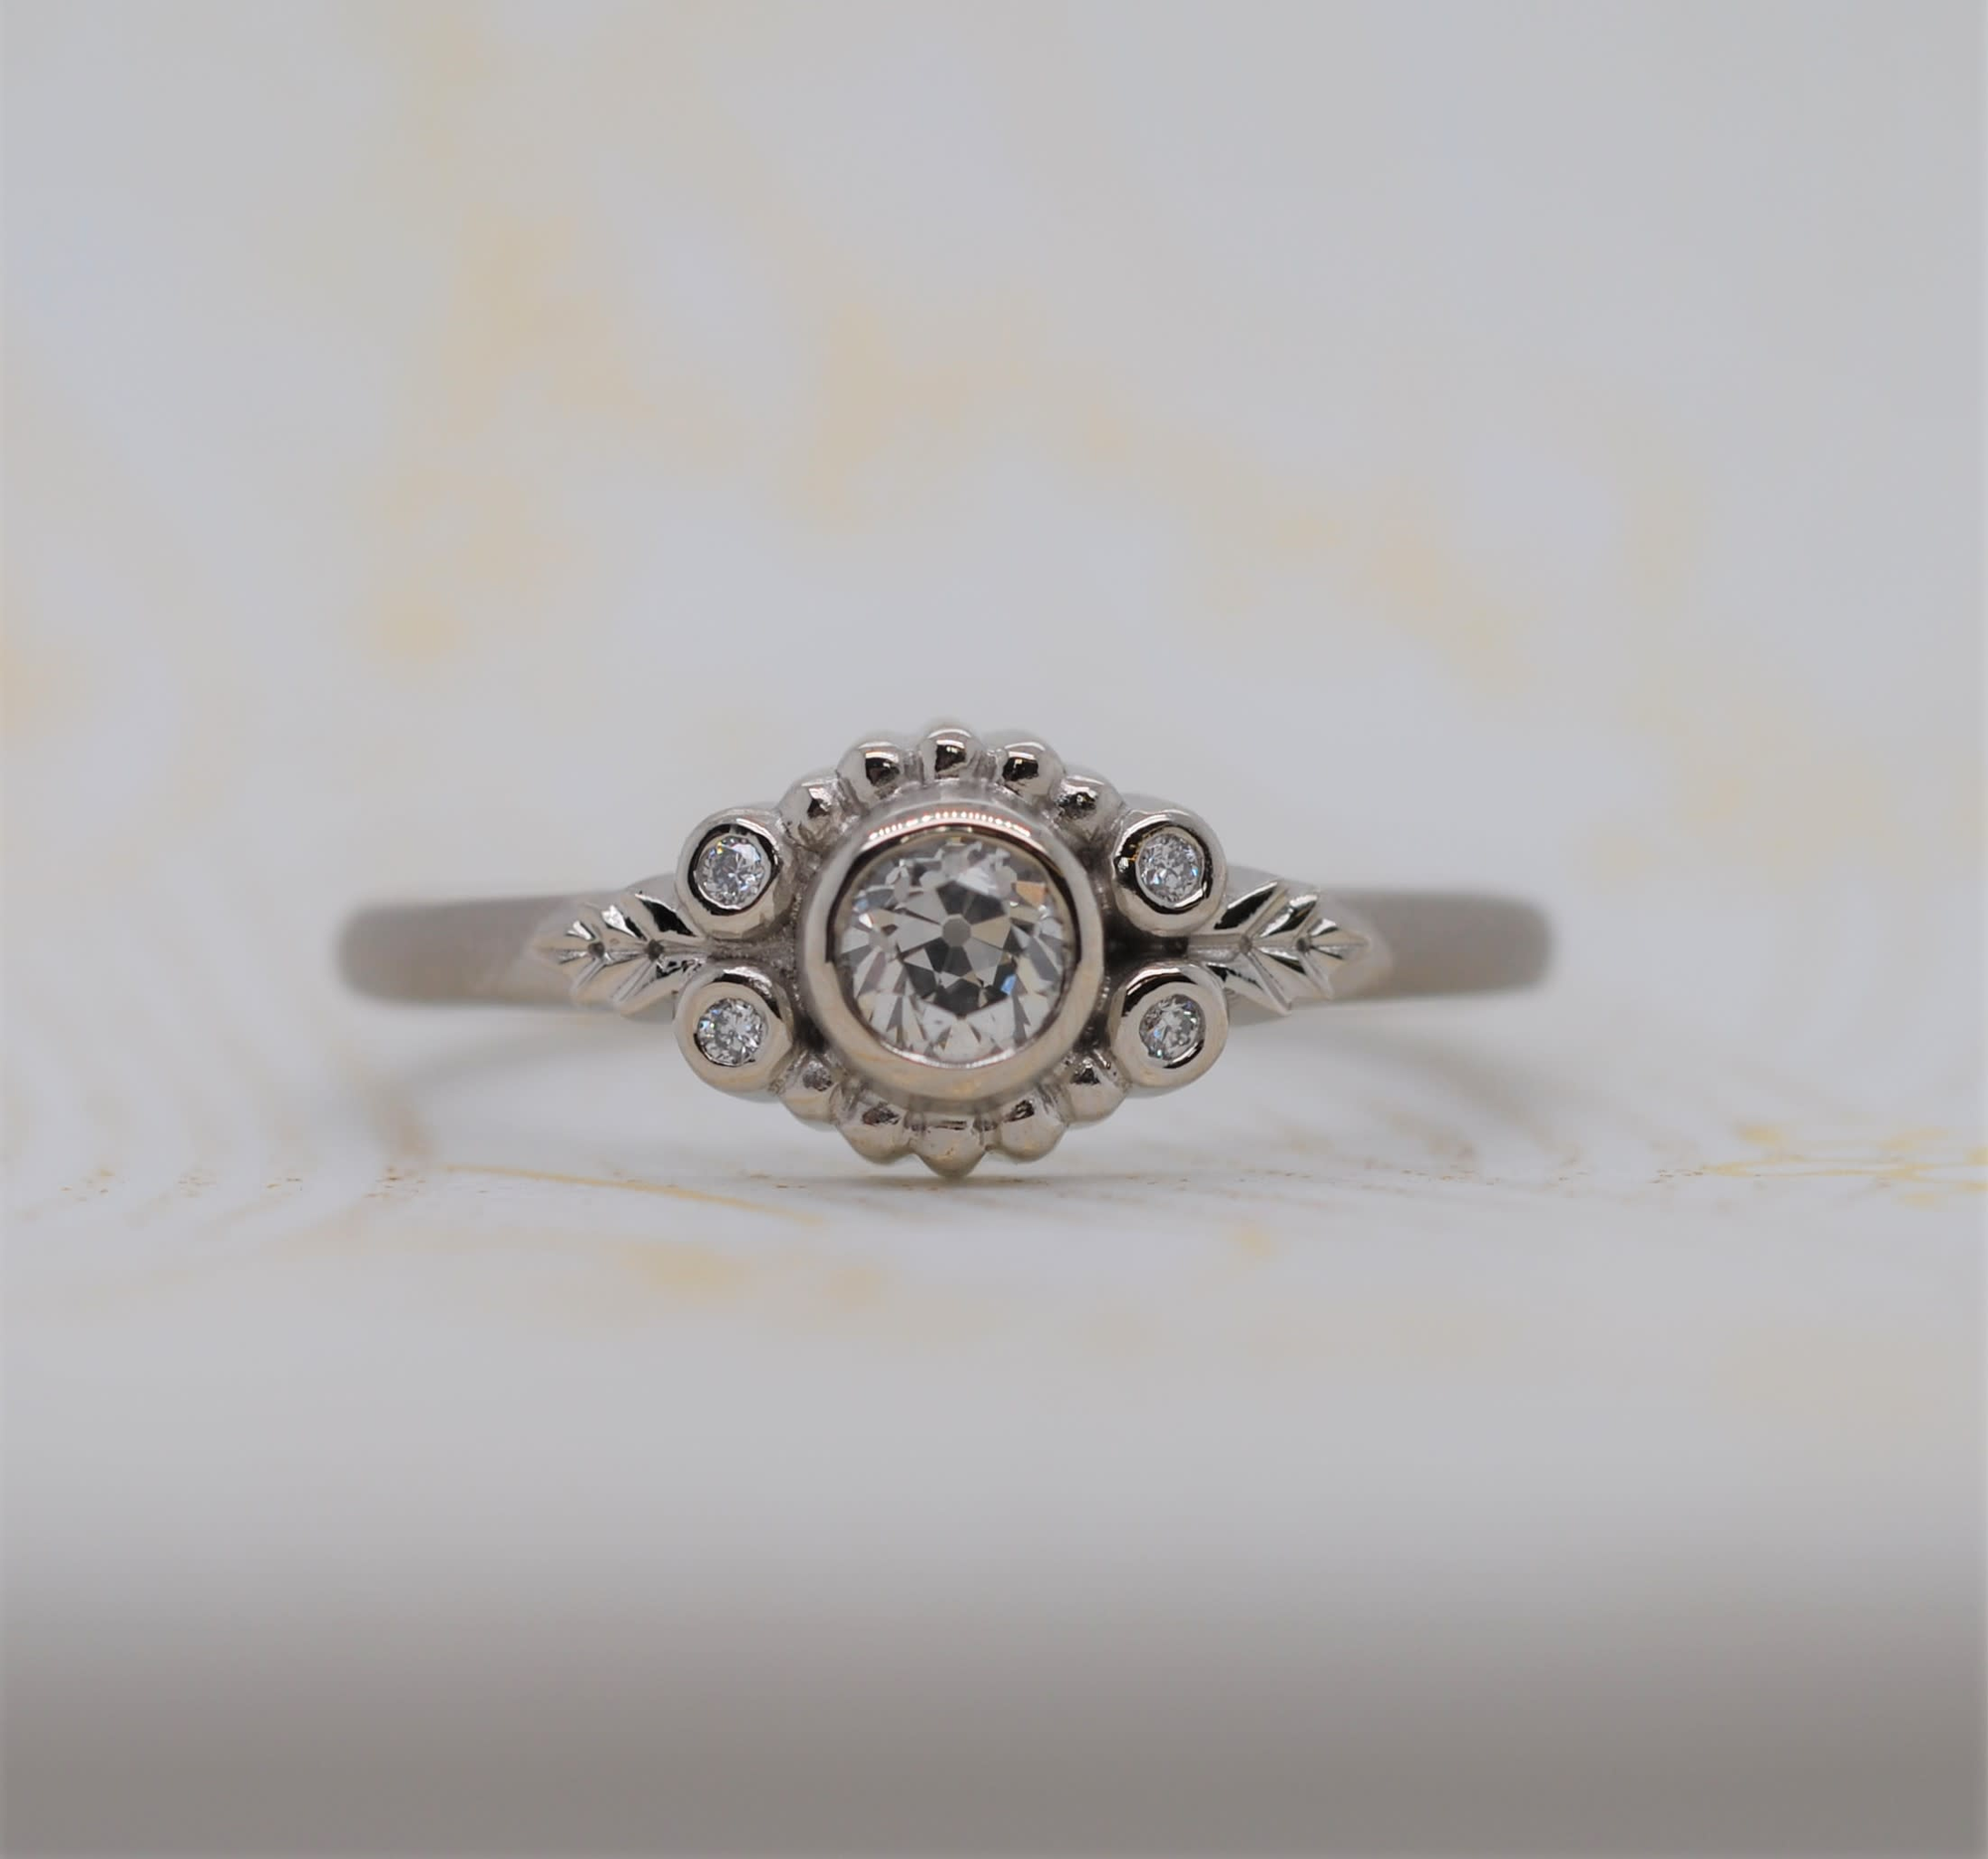 Wood Nymph Solitaire Ring - Magpie Jewellery